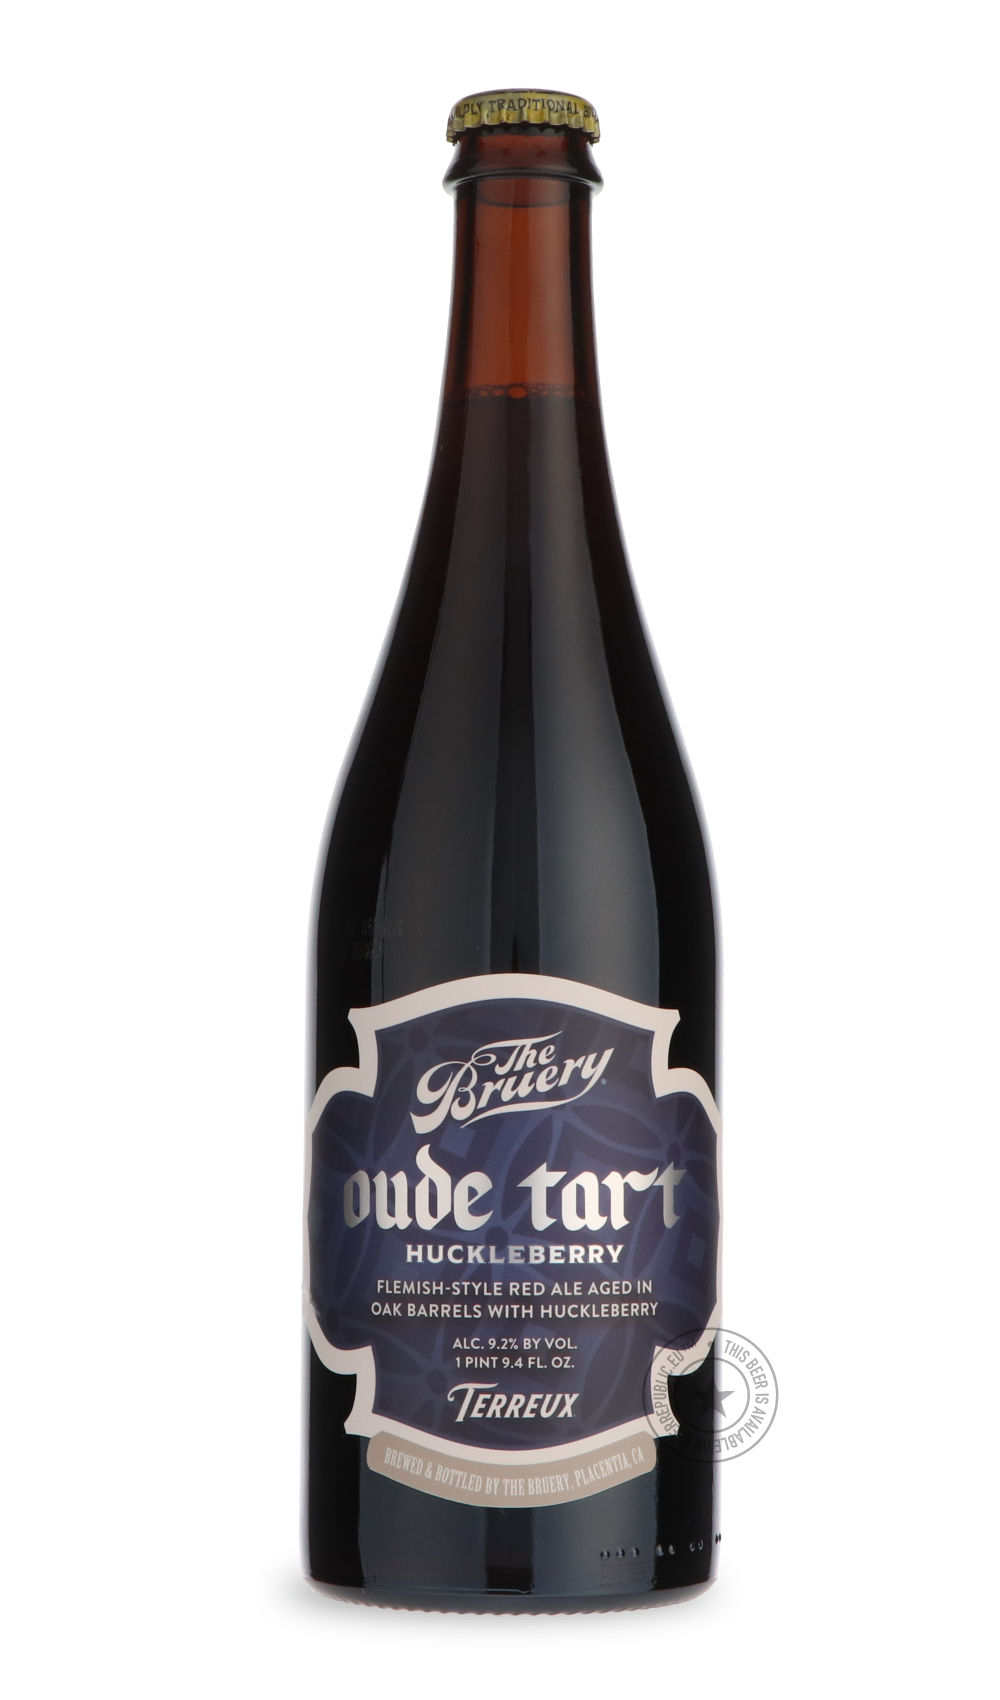 -The Bruery- Oude Tart Huckleberry-Sour / Wild & Fruity- Only @ Beer Republic - The best online beer store for American & Canadian craft beer - Buy beer online from the USA and Canada - Bier online kopen - Amerikaans bier kopen - Craft beer store - Craft beer kopen - Amerikanisch bier kaufen - Bier online kaufen - Acheter biere online - IPA - Stout - Porter - New England IPA - Hazy IPA - Imperial Stout - Barrel Aged - Barrel Aged Imperial Stout - Brown - Dark beer - Blond - Blonde - Pilsner - Lager - Wheat 